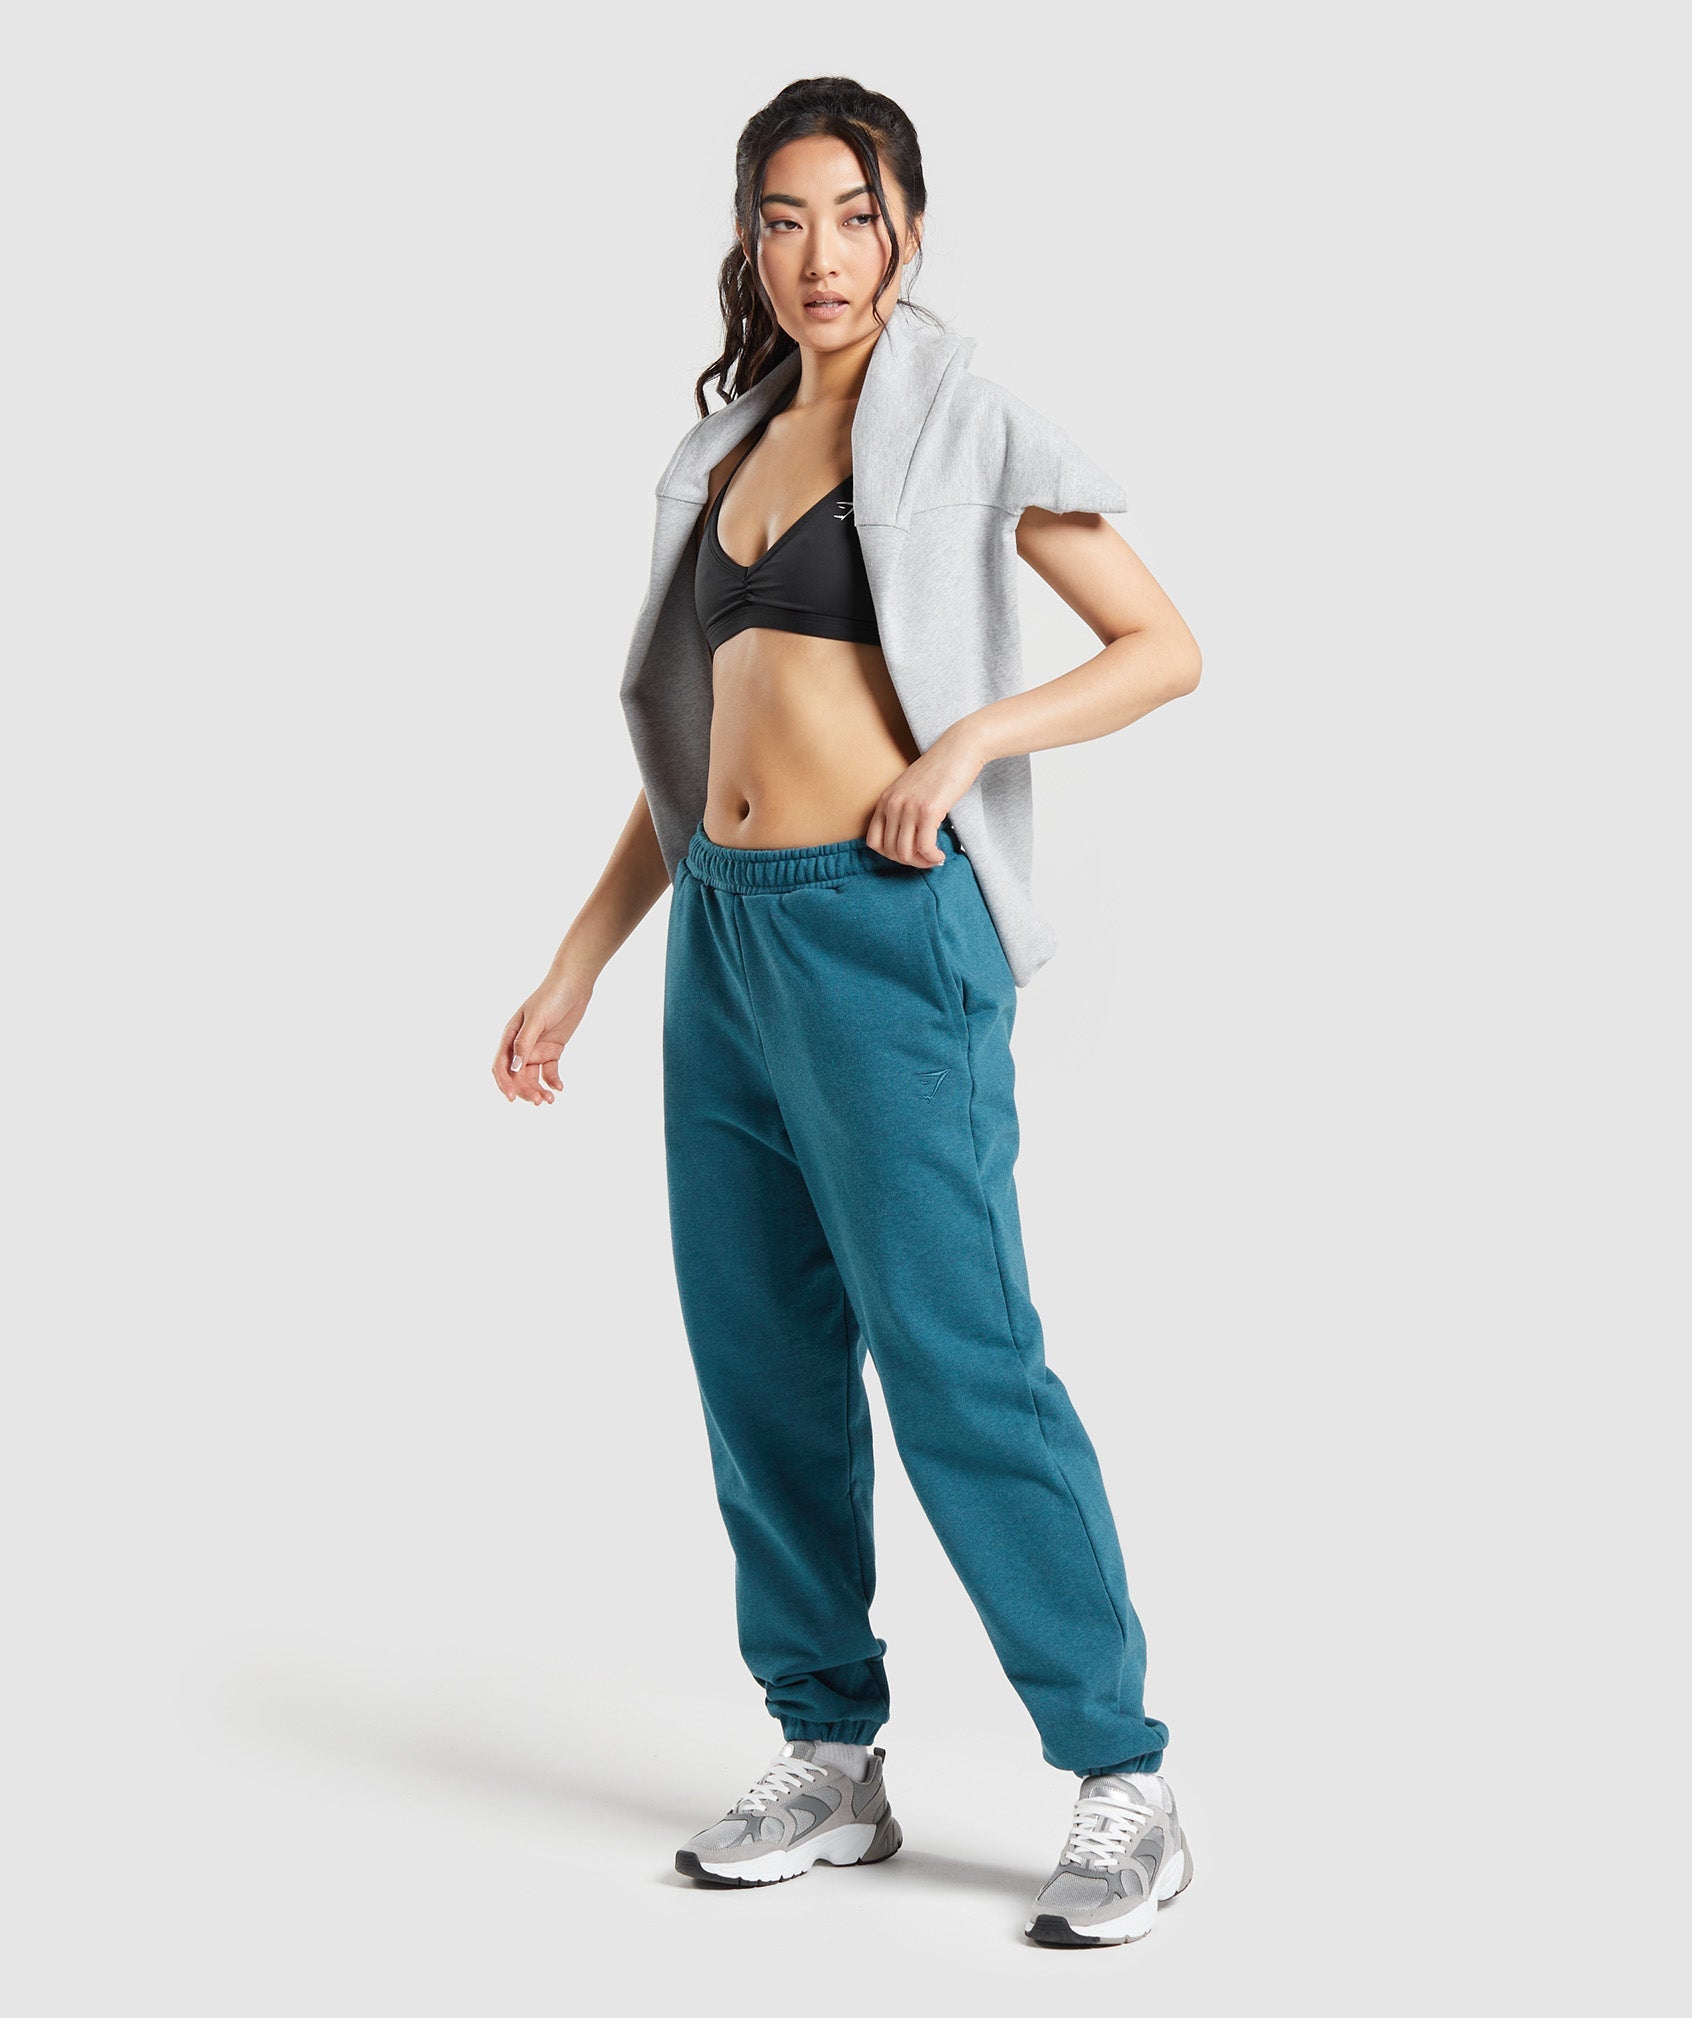 Rest Day Sweats Joggers in Steel Blue Marl - view 4